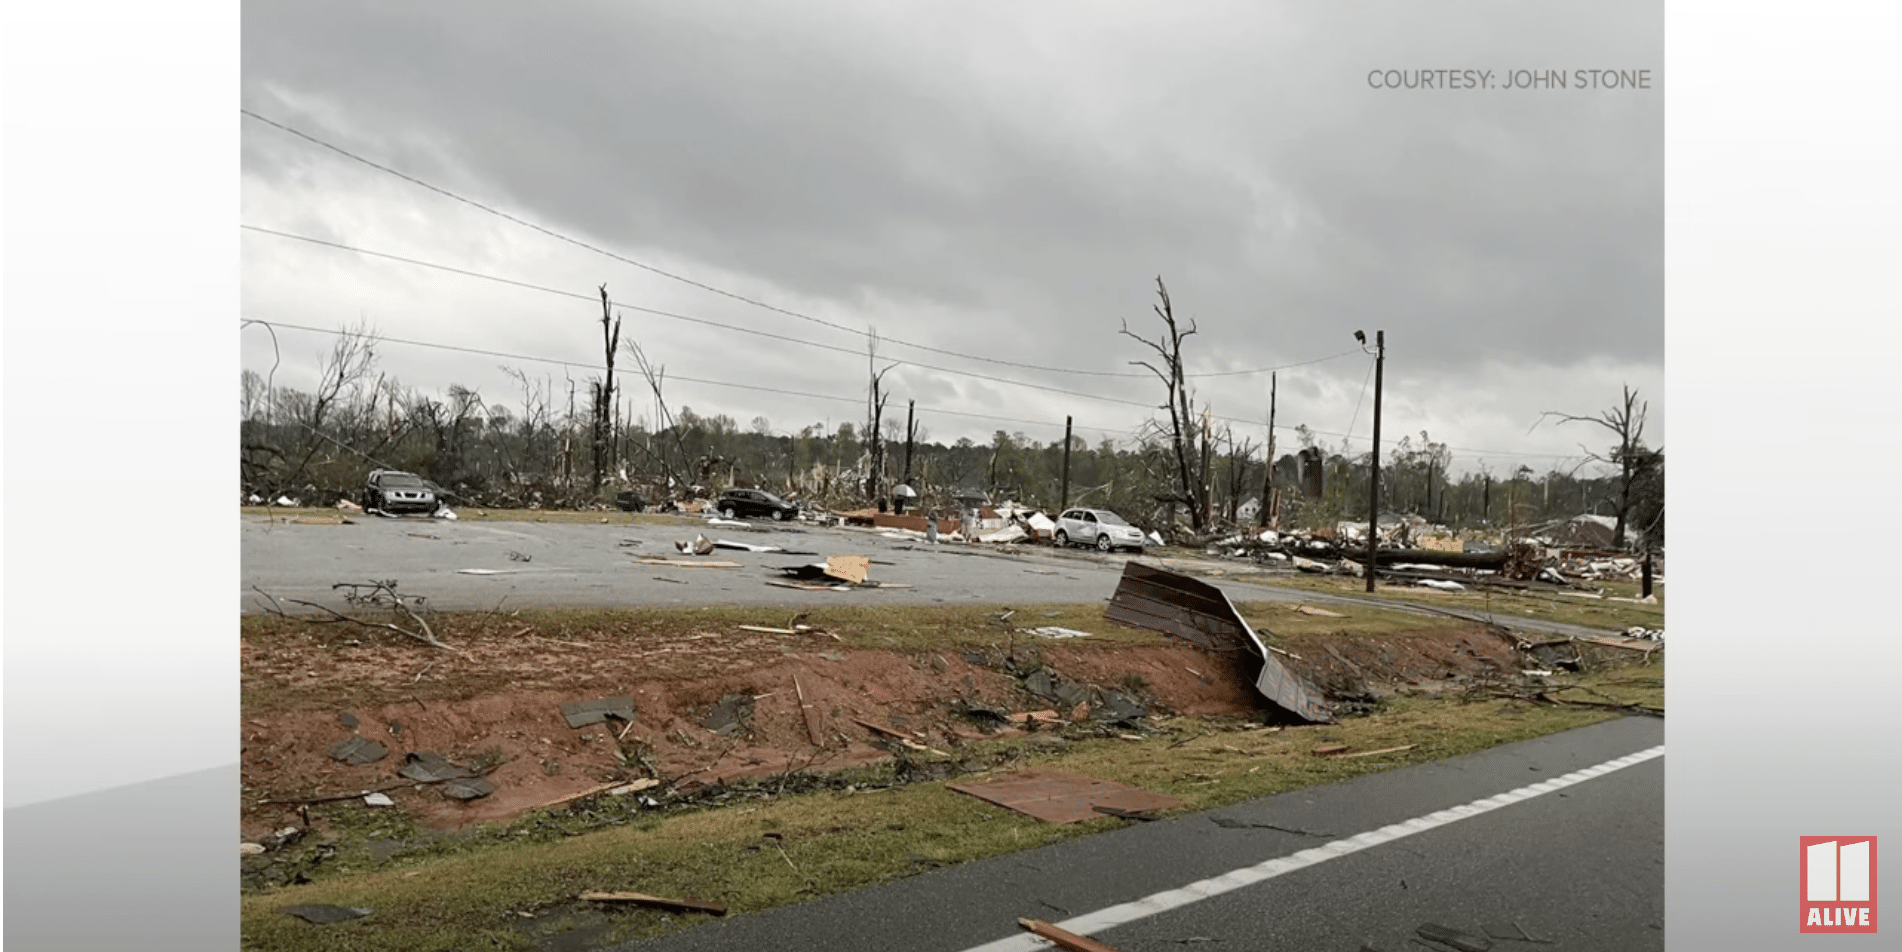 DEVELOPING: 30 million Southerners at risk of dangerous weather, “Large and extremely dangerous tornado” strikes south of LaGrange, Georgia